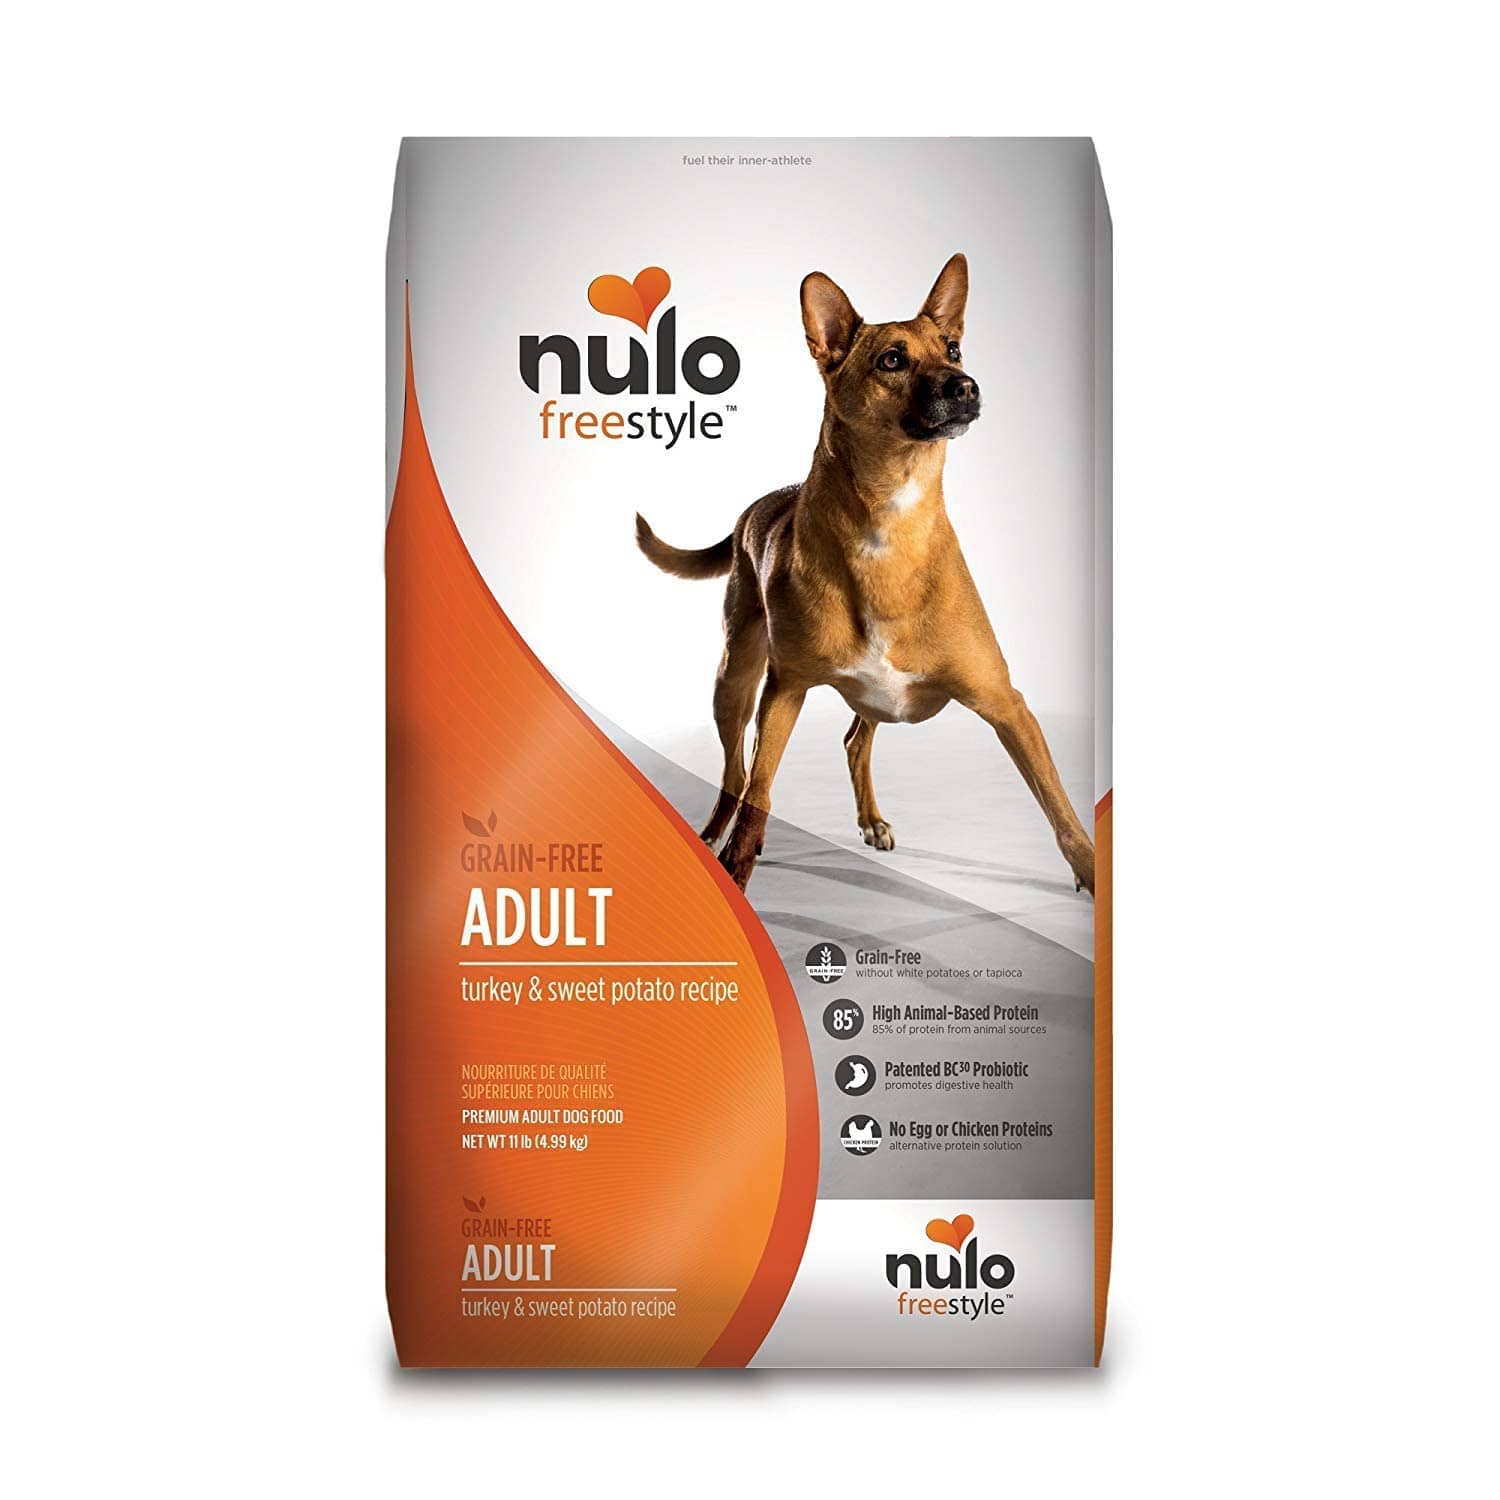 Nulo Grain Free Dog Food Review